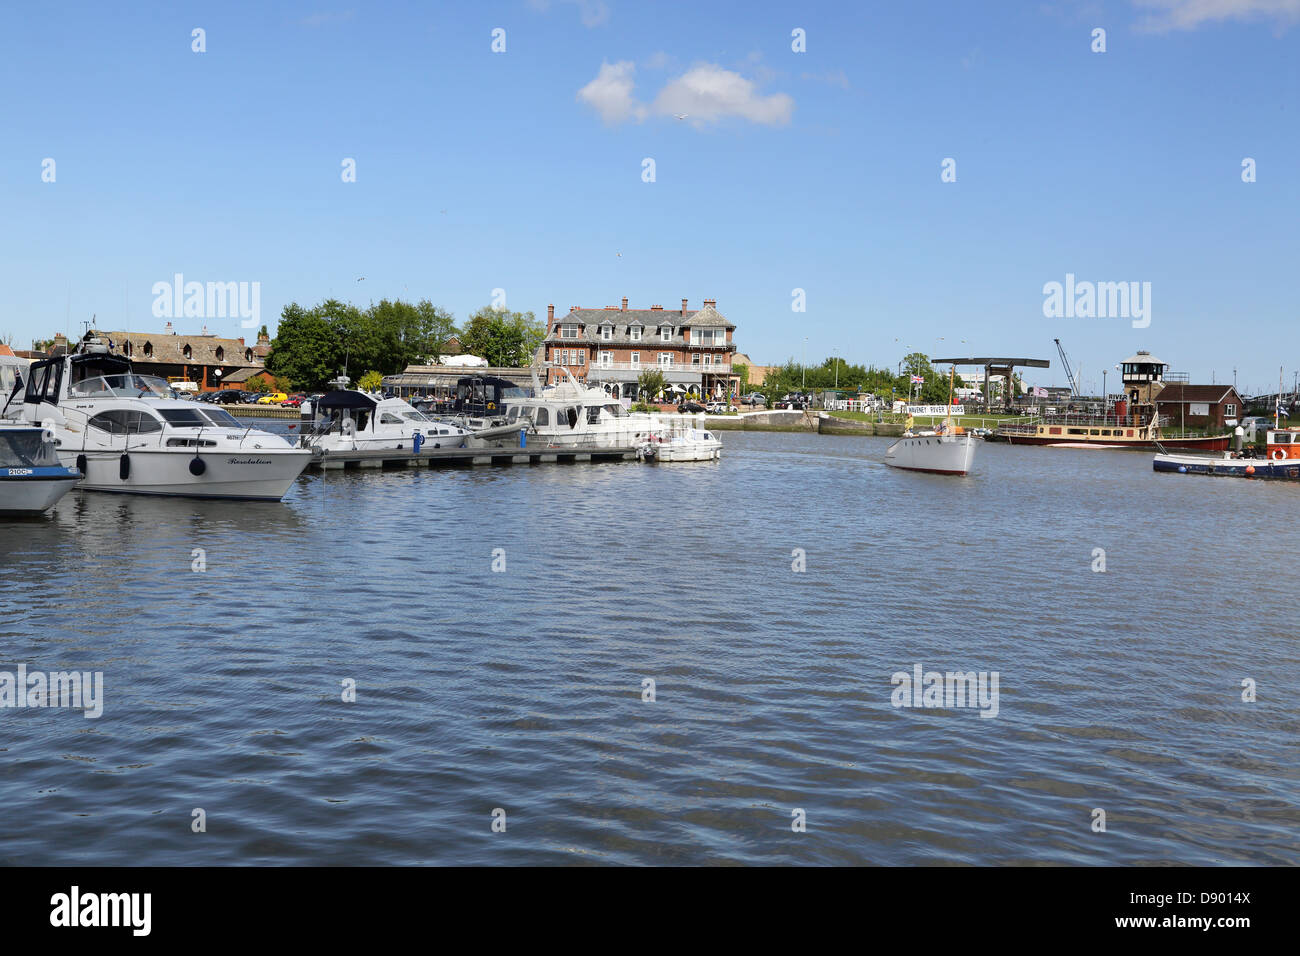 boats and cruisers on oulton broad in suffolk Stock Photo